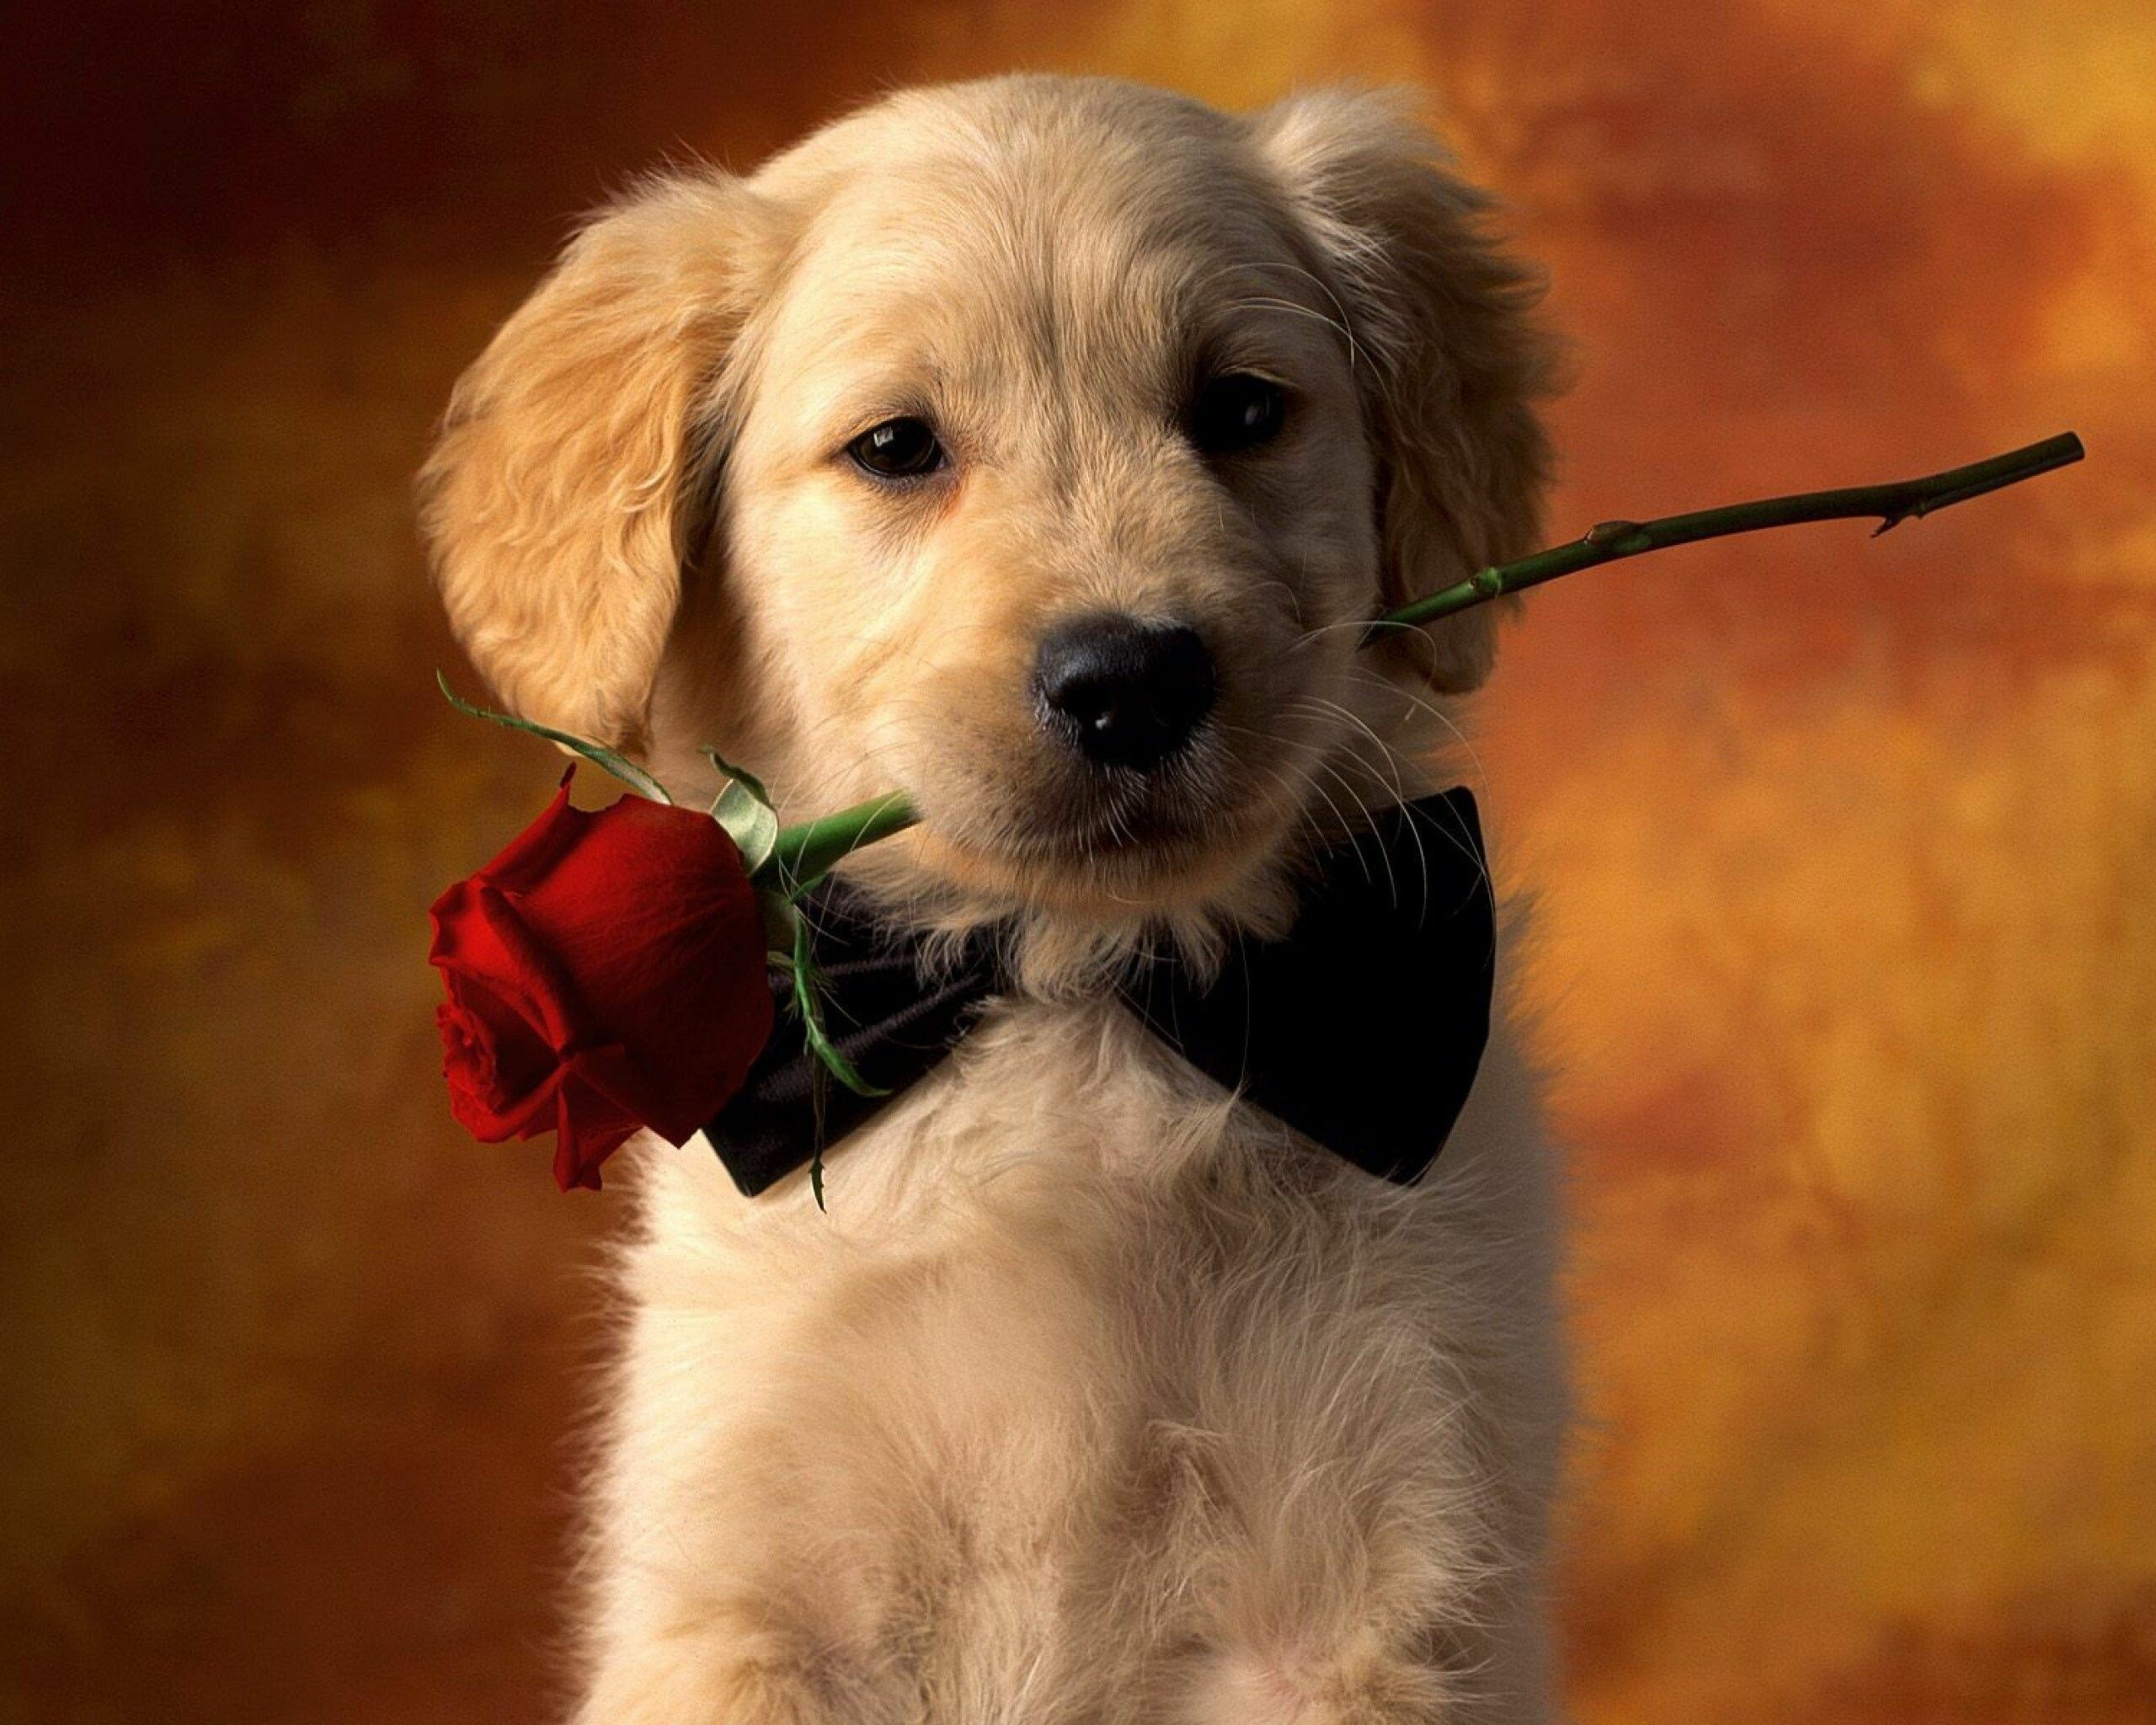 Puppy: Most popular domestic animals in the world, A juvenile dog. 2560x2050 HD Wallpaper.